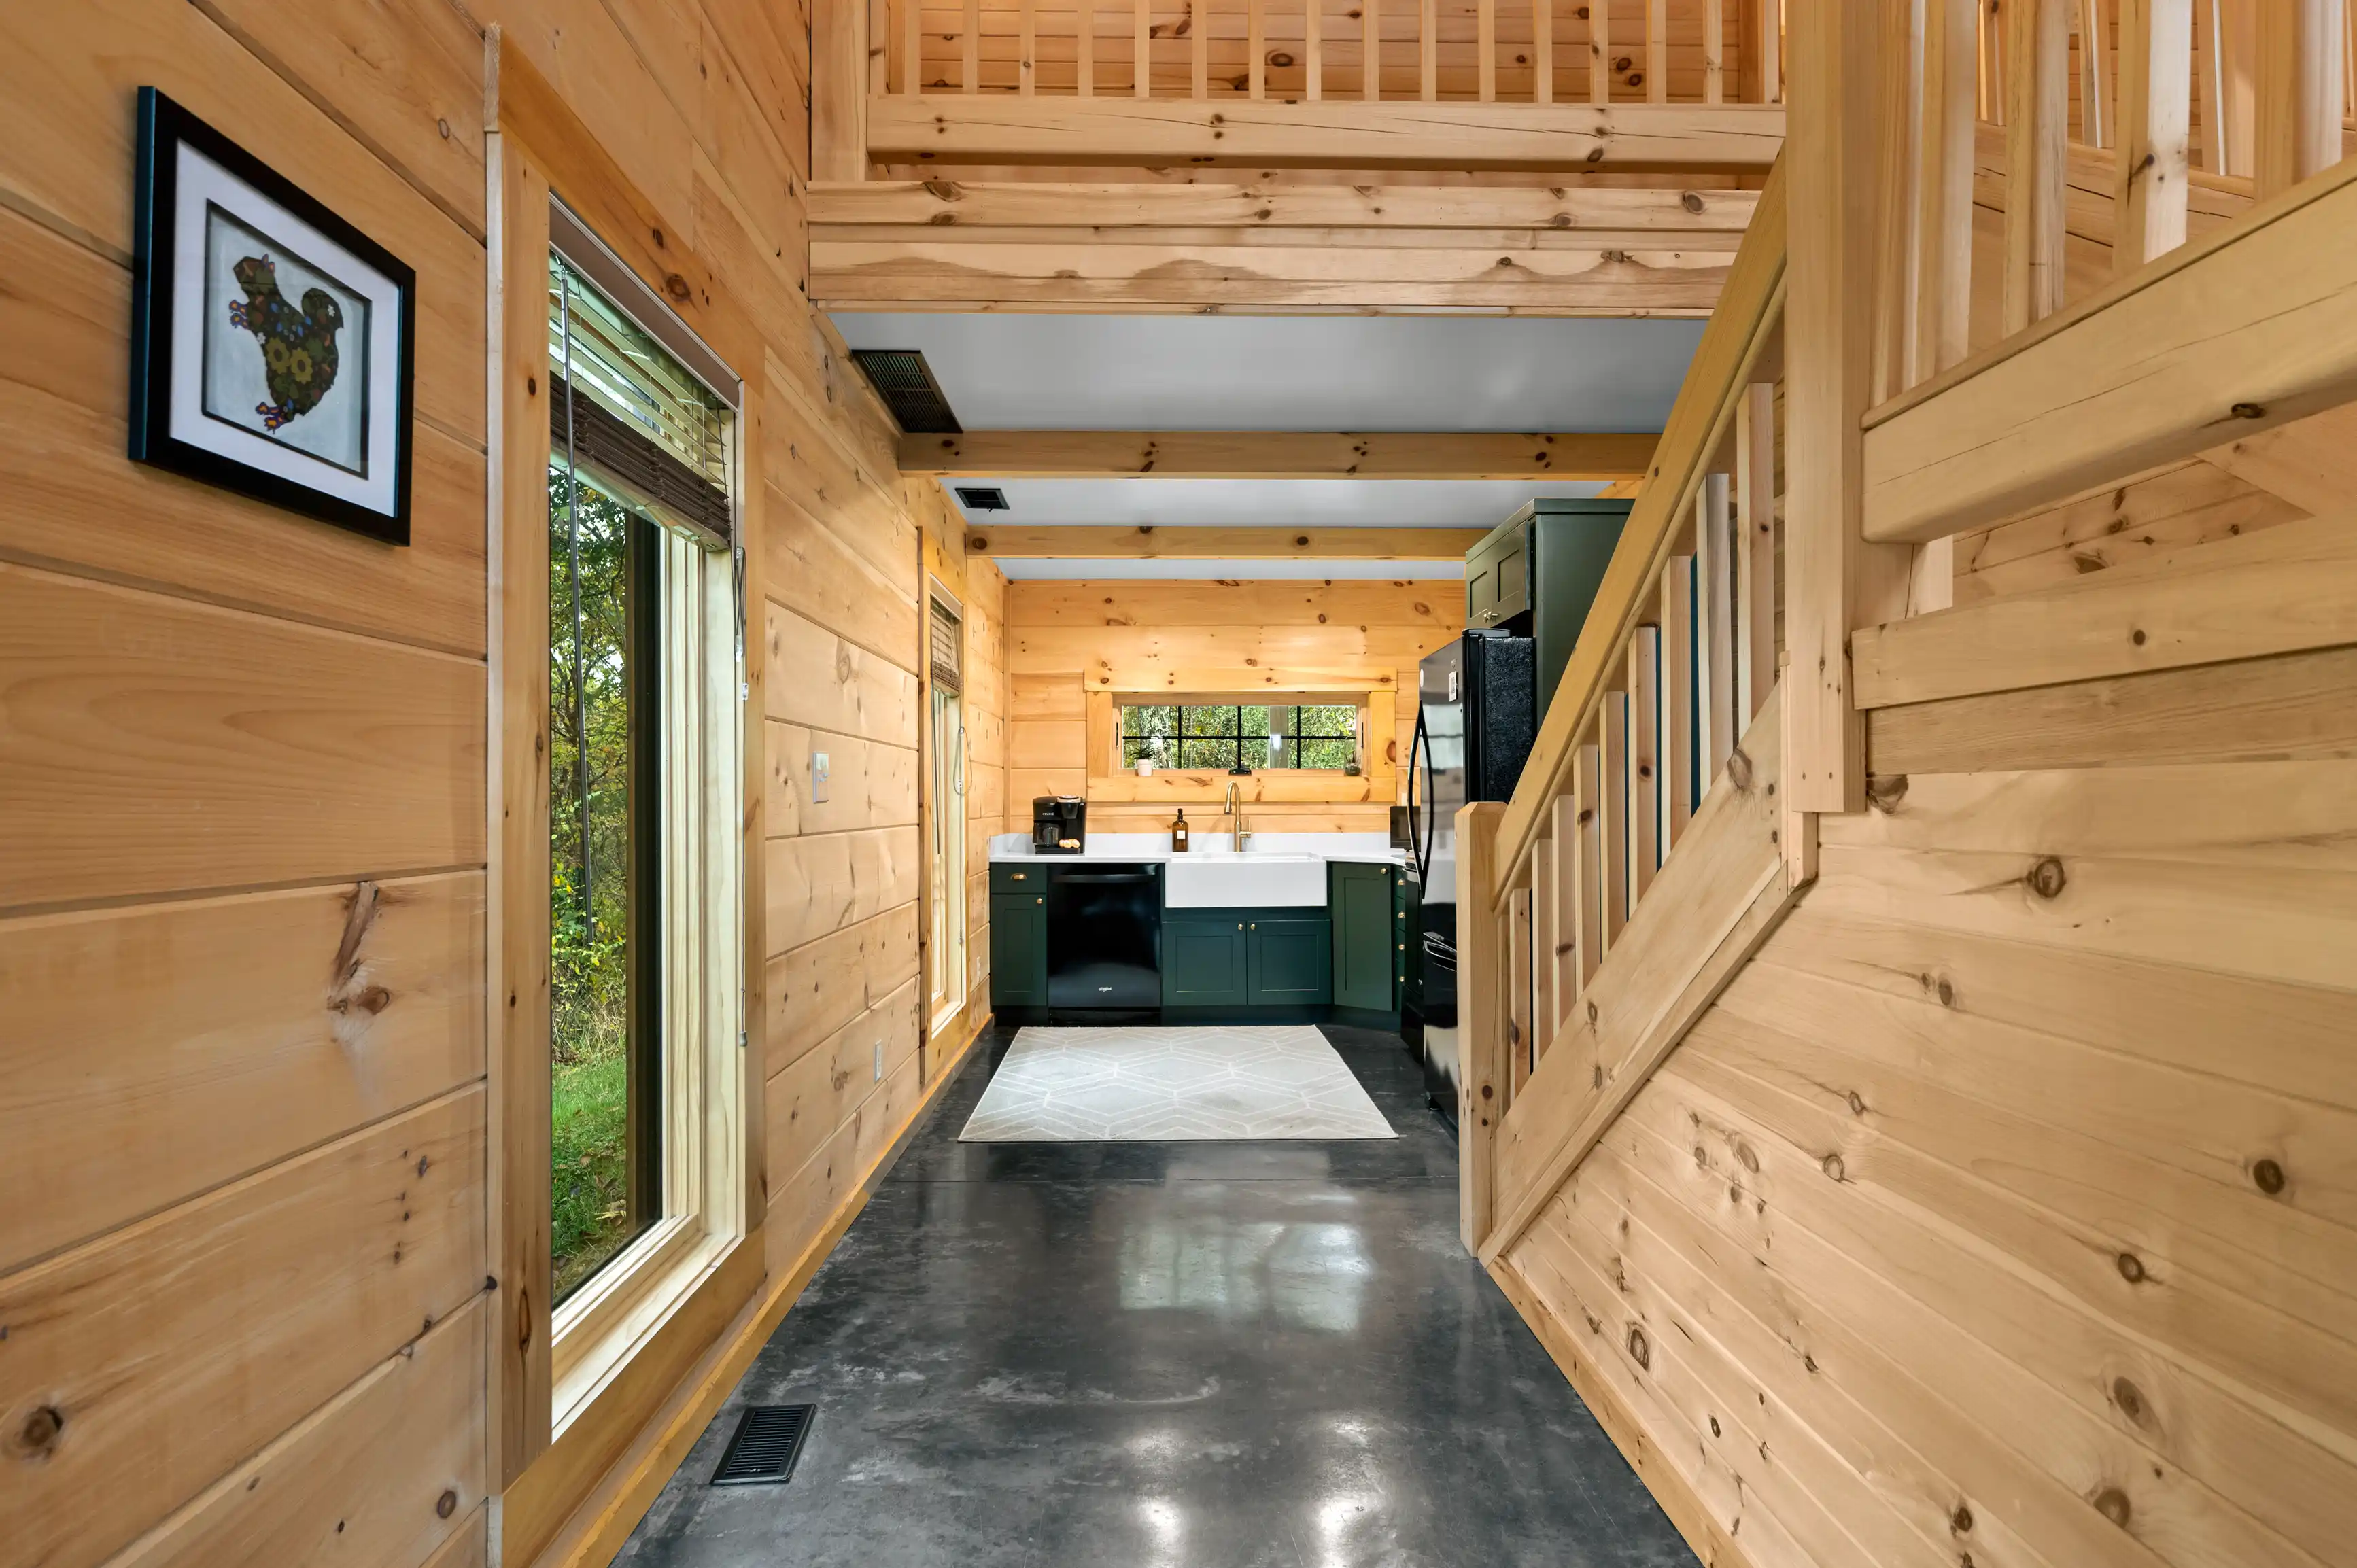 Interior of a modern tiny house with wooden walls, a loft bedroom, and a kitchen area with green cabinets.